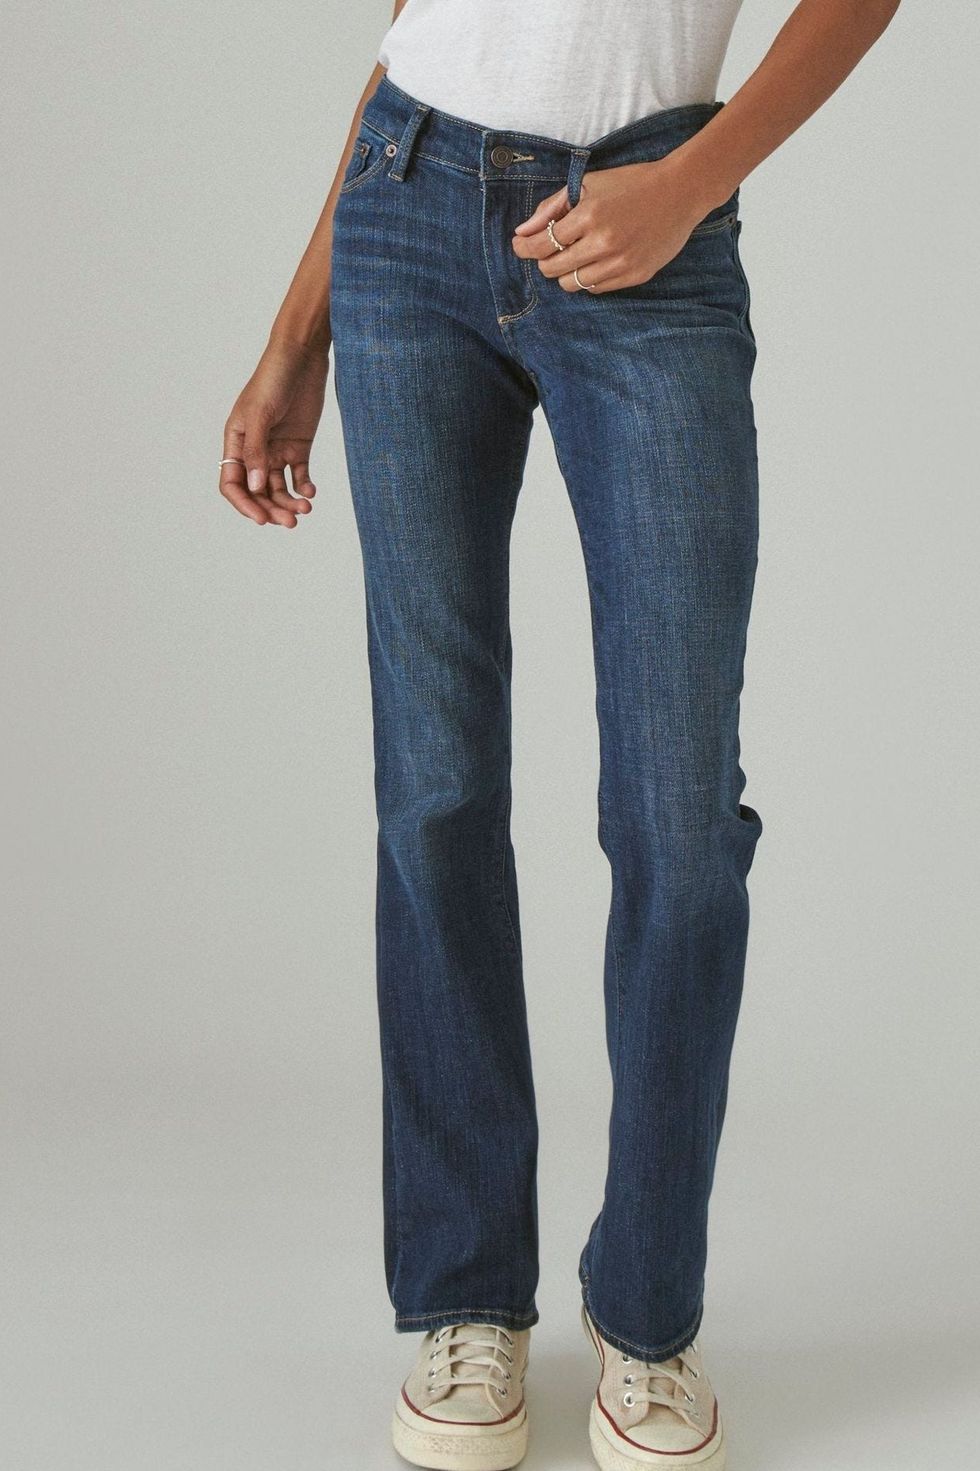 MID RISE SWEET BOOT  Lucky brand jeans, Lucky brand, Jeans and boots